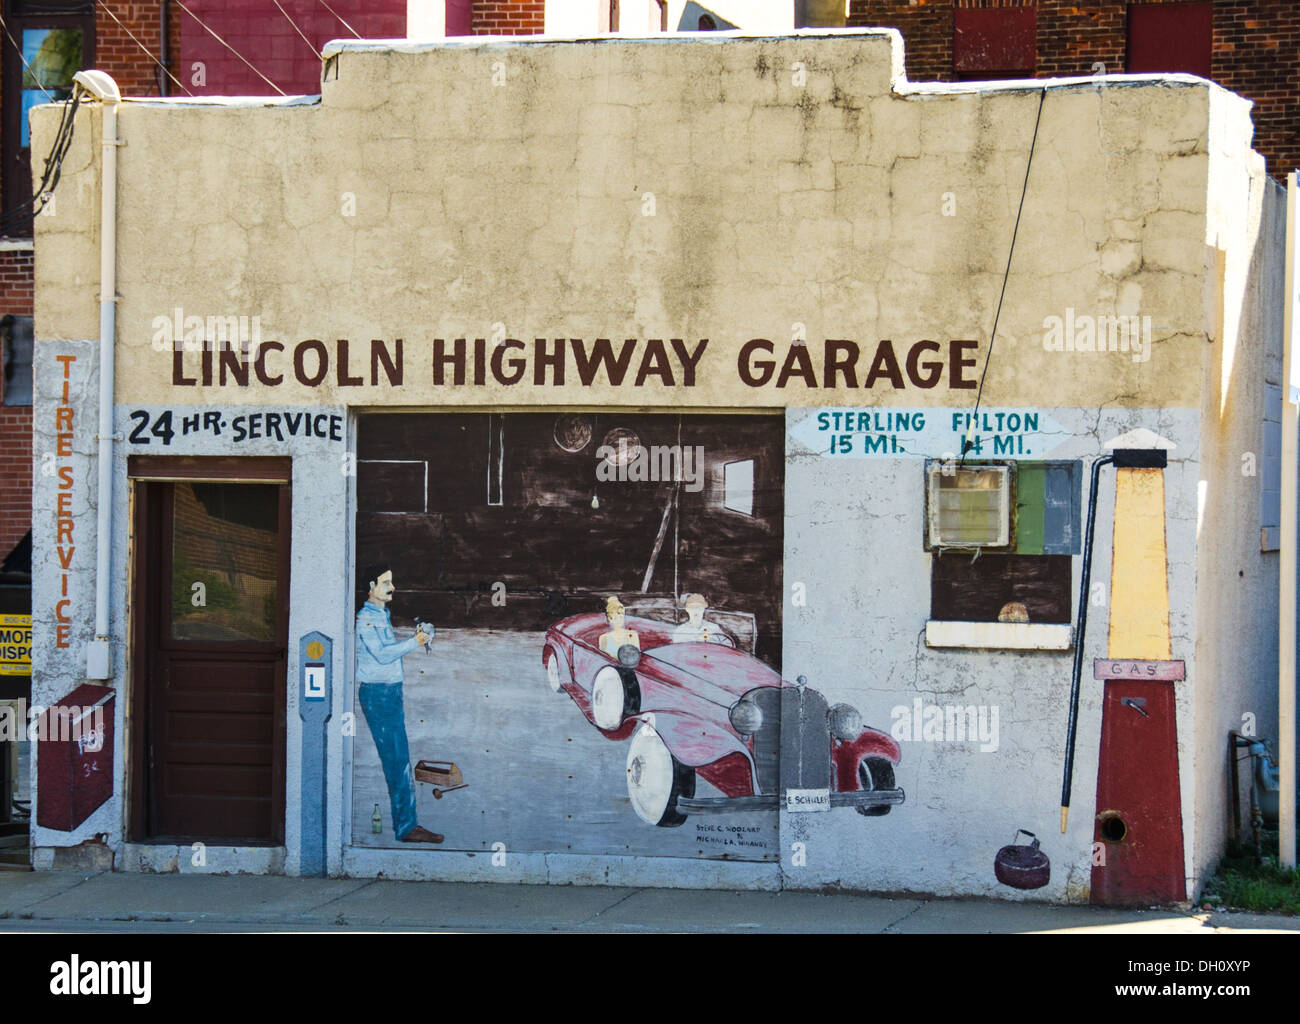 The Lincoln Highway Garage mural on the side of an old garage in Morrison, Illinois, a town along the Lincoln Highway. Stock Photo